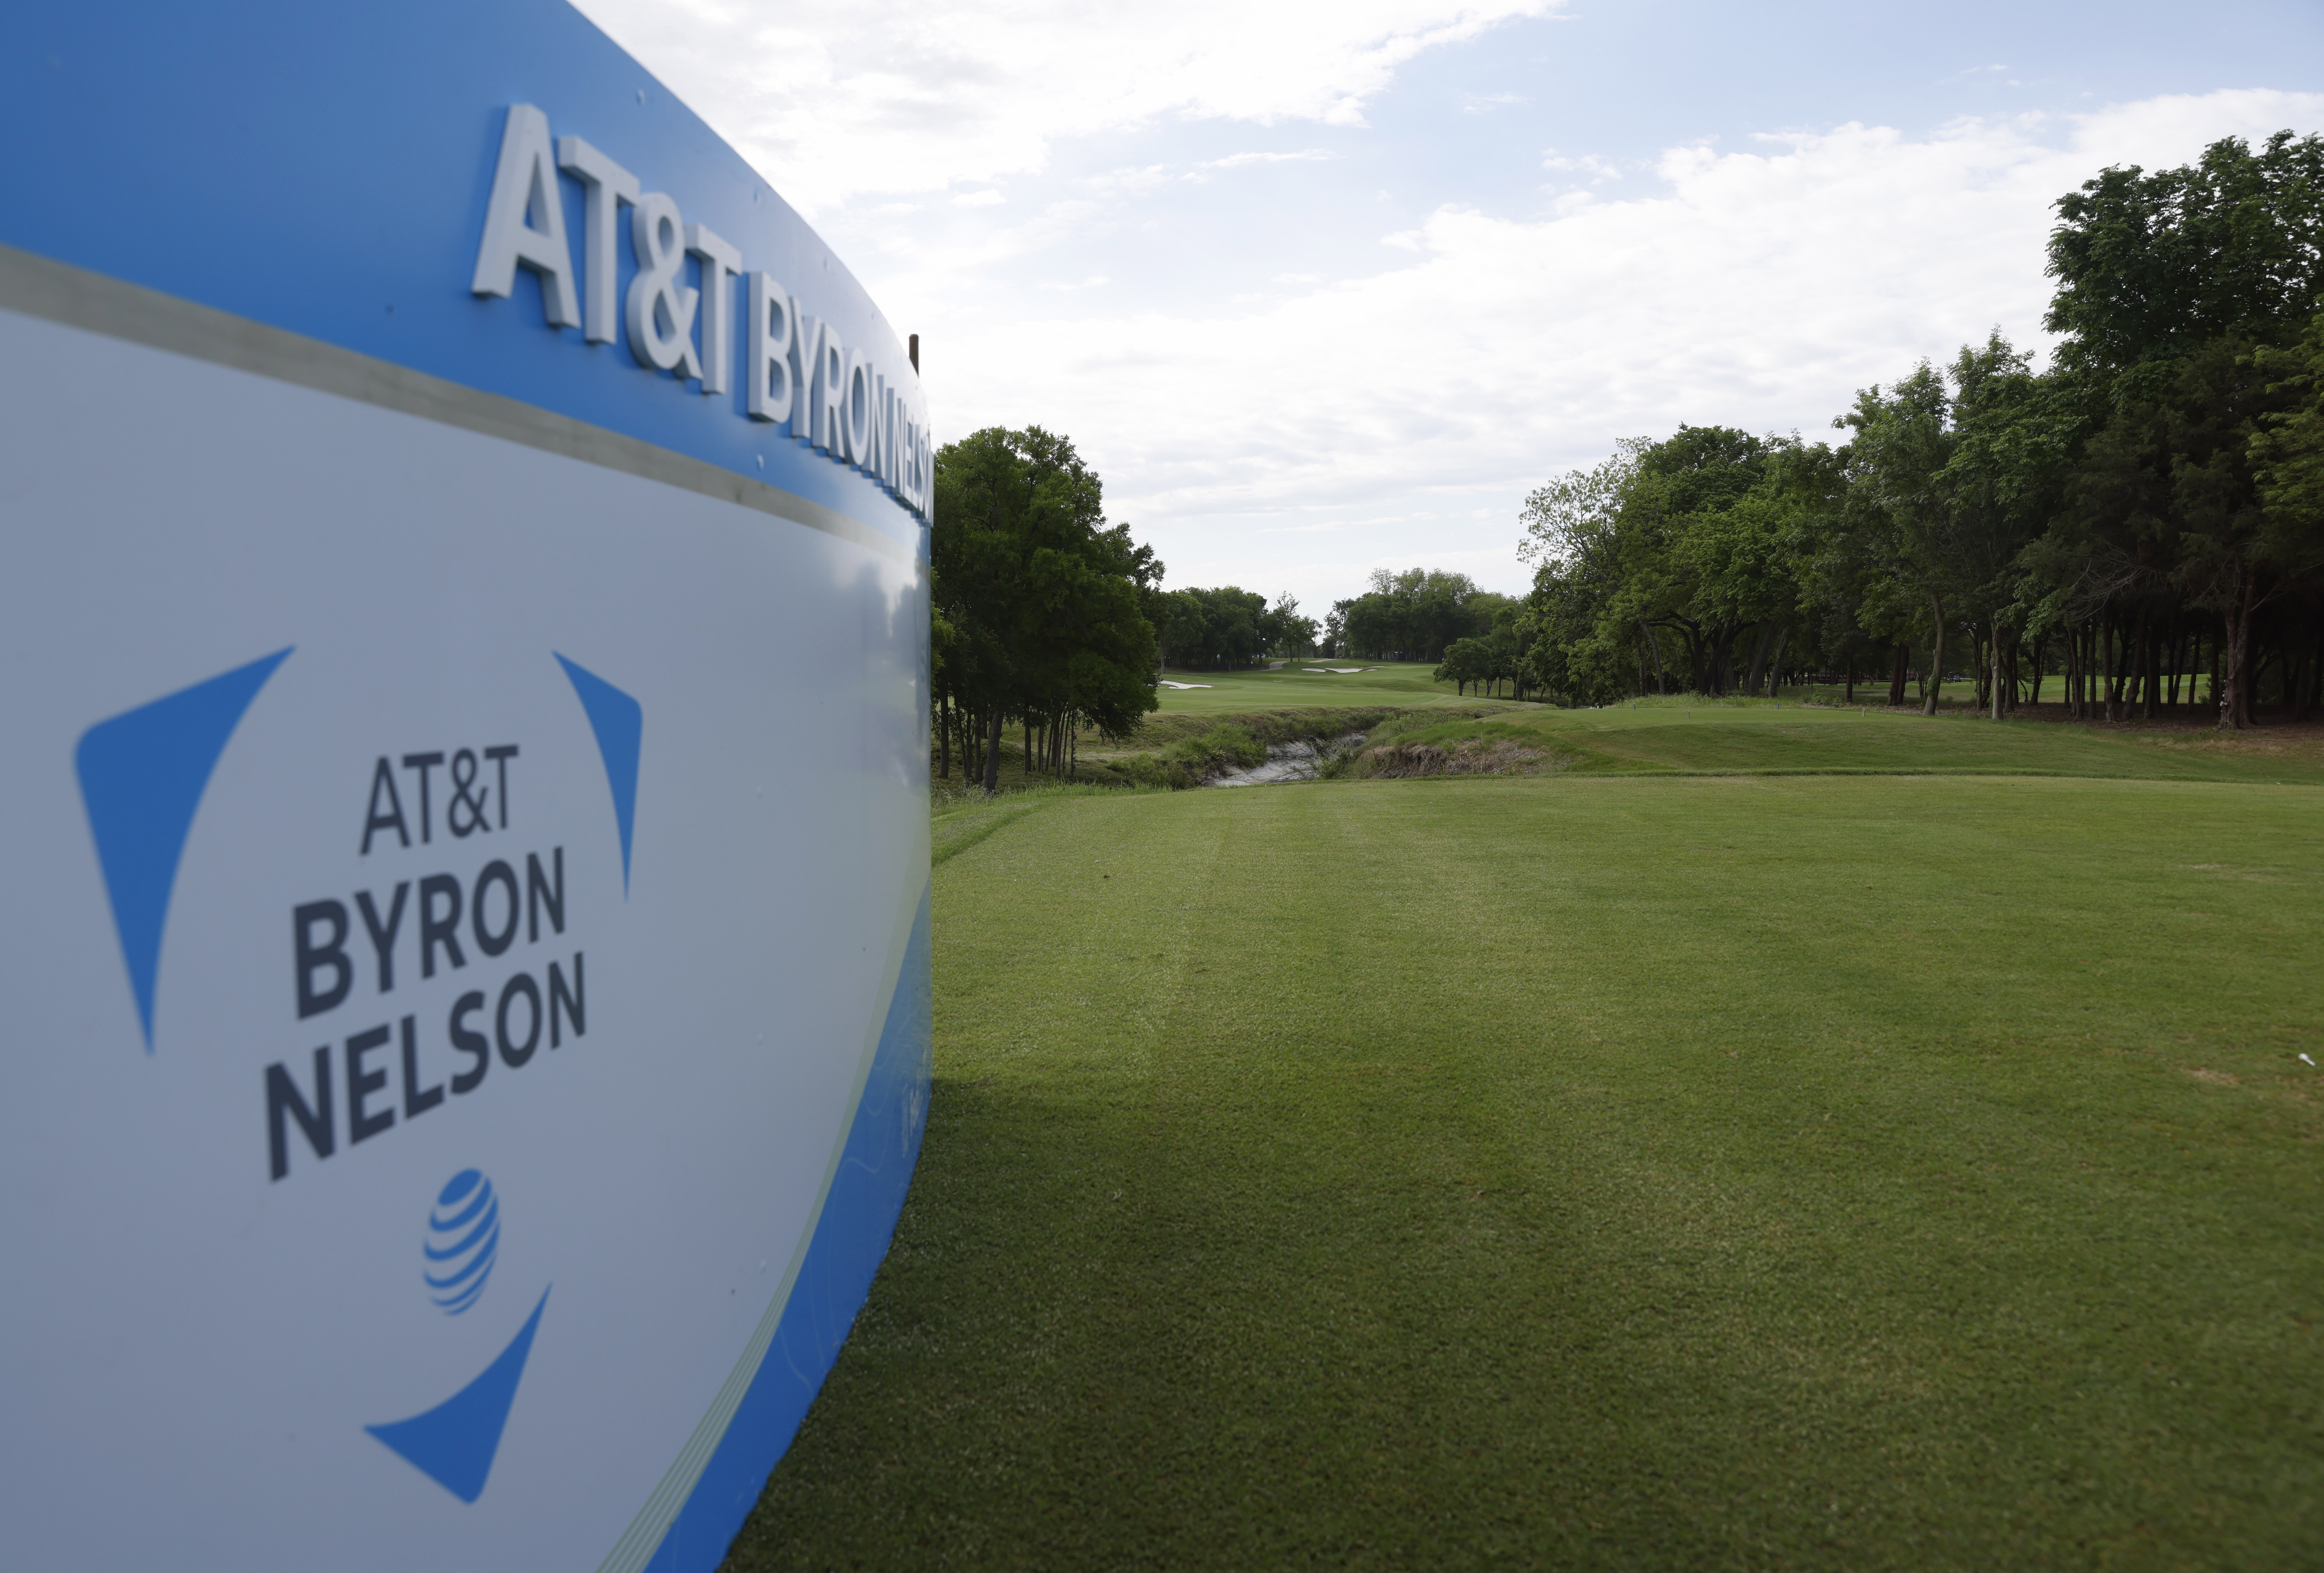 At&t byron nelson 2021